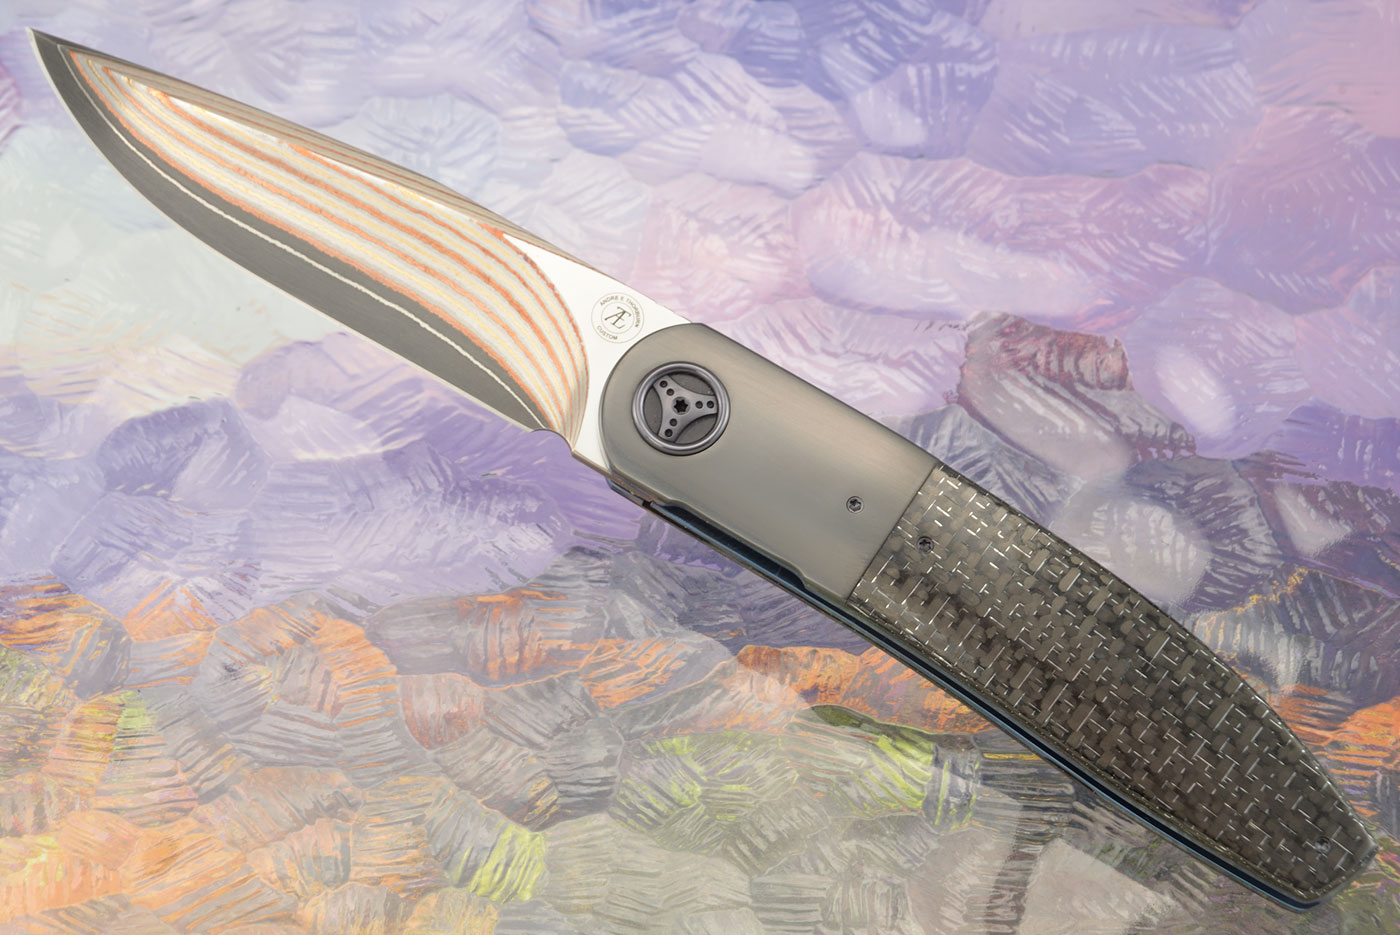 L28 Front Flipper with Silver Strike Carbon Fiber and Zirconium - Stainless Yushoku (Ceramic IKBS)